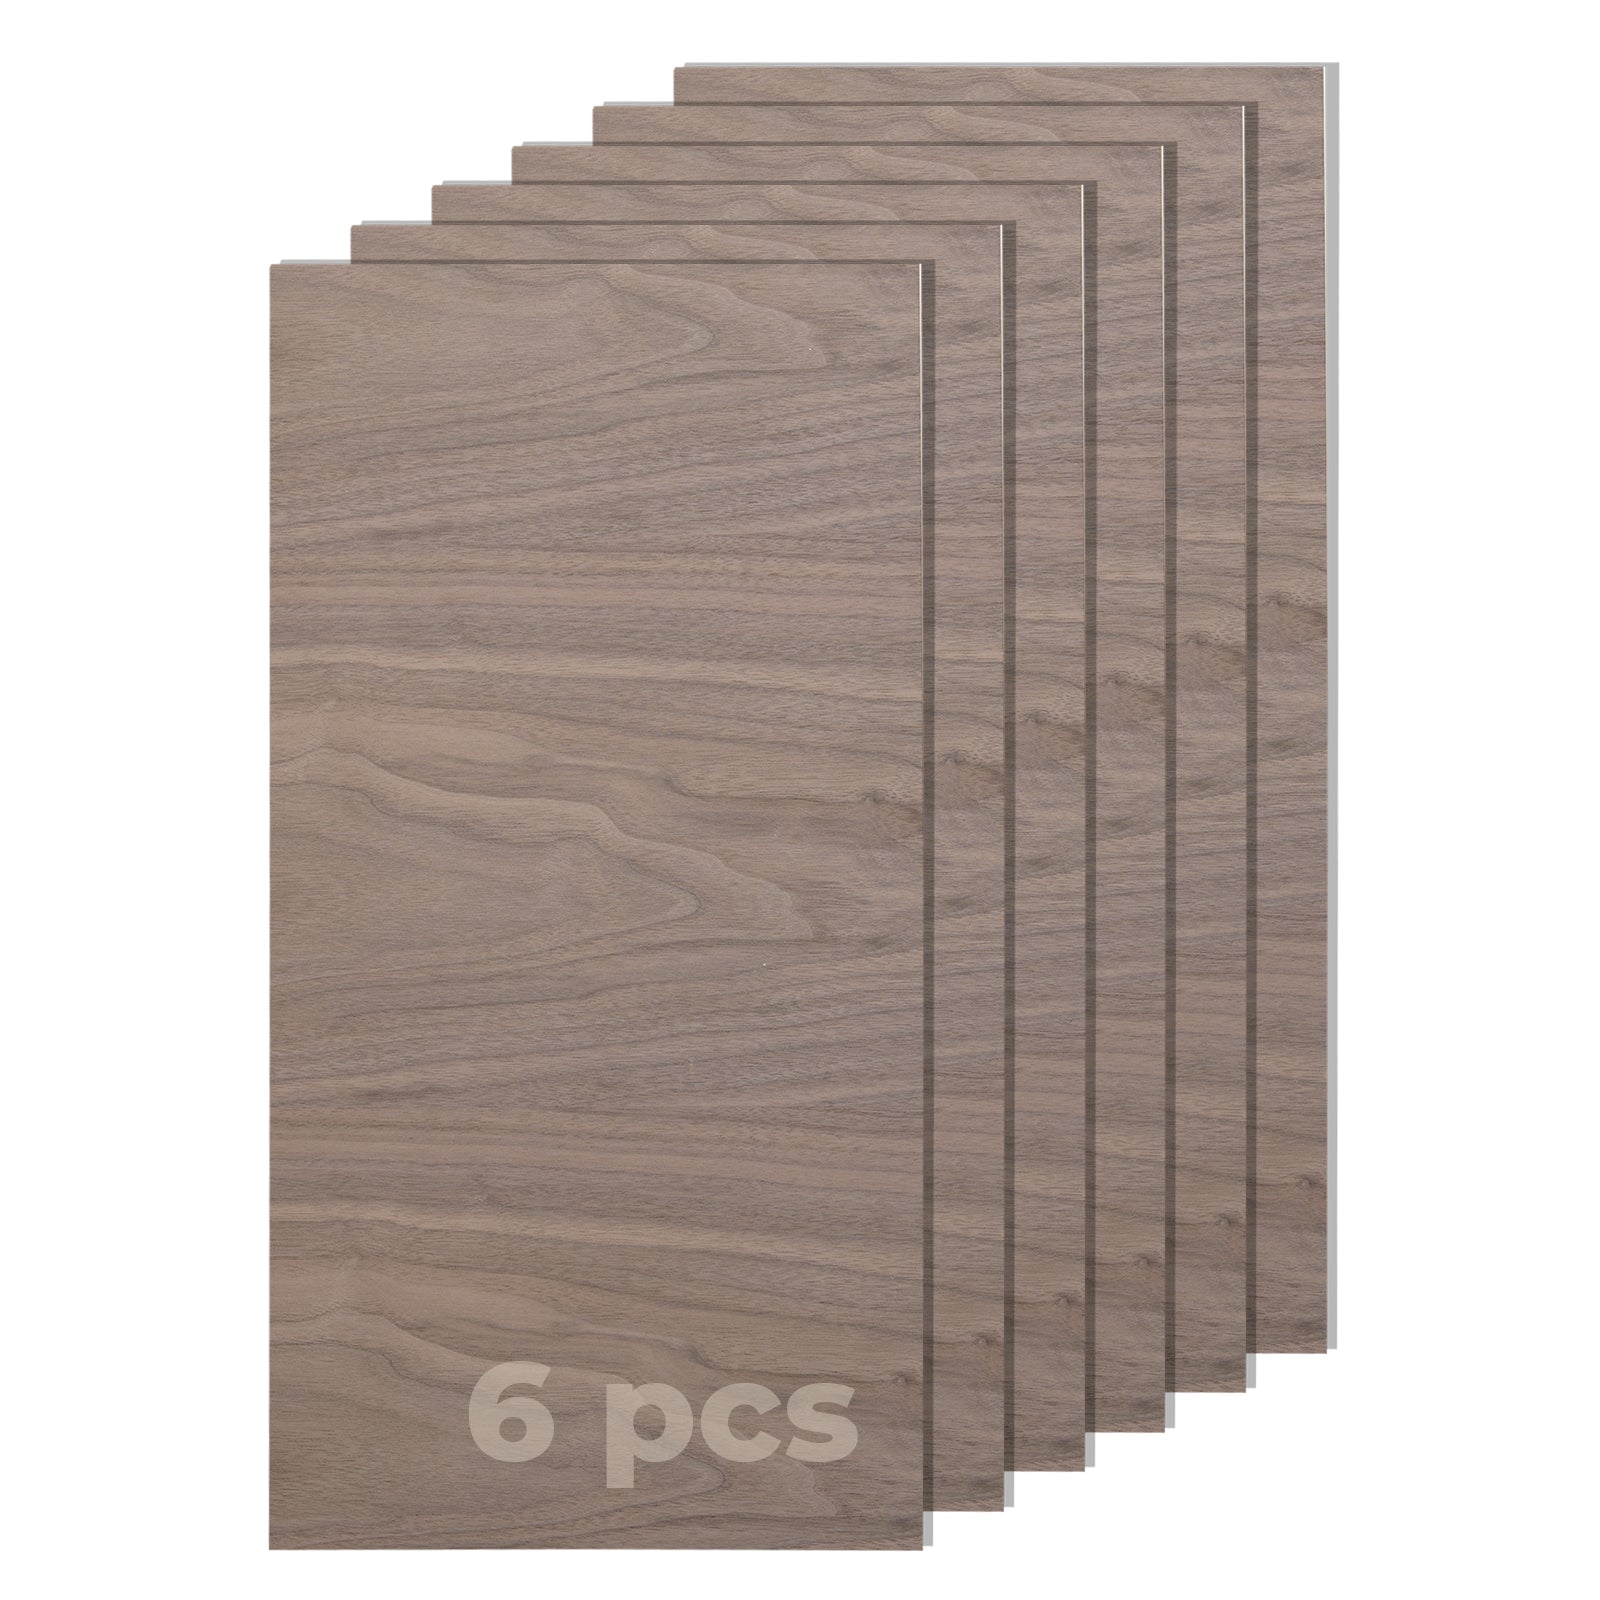 xTool Selected Walnut Plywood 6pcs, 1/8 Plywood Sheets A/B Grade Walnut  Plywood Wood for Crafts, 12x12 Thin Wood 3mm Plywood for Laser Cutting  and